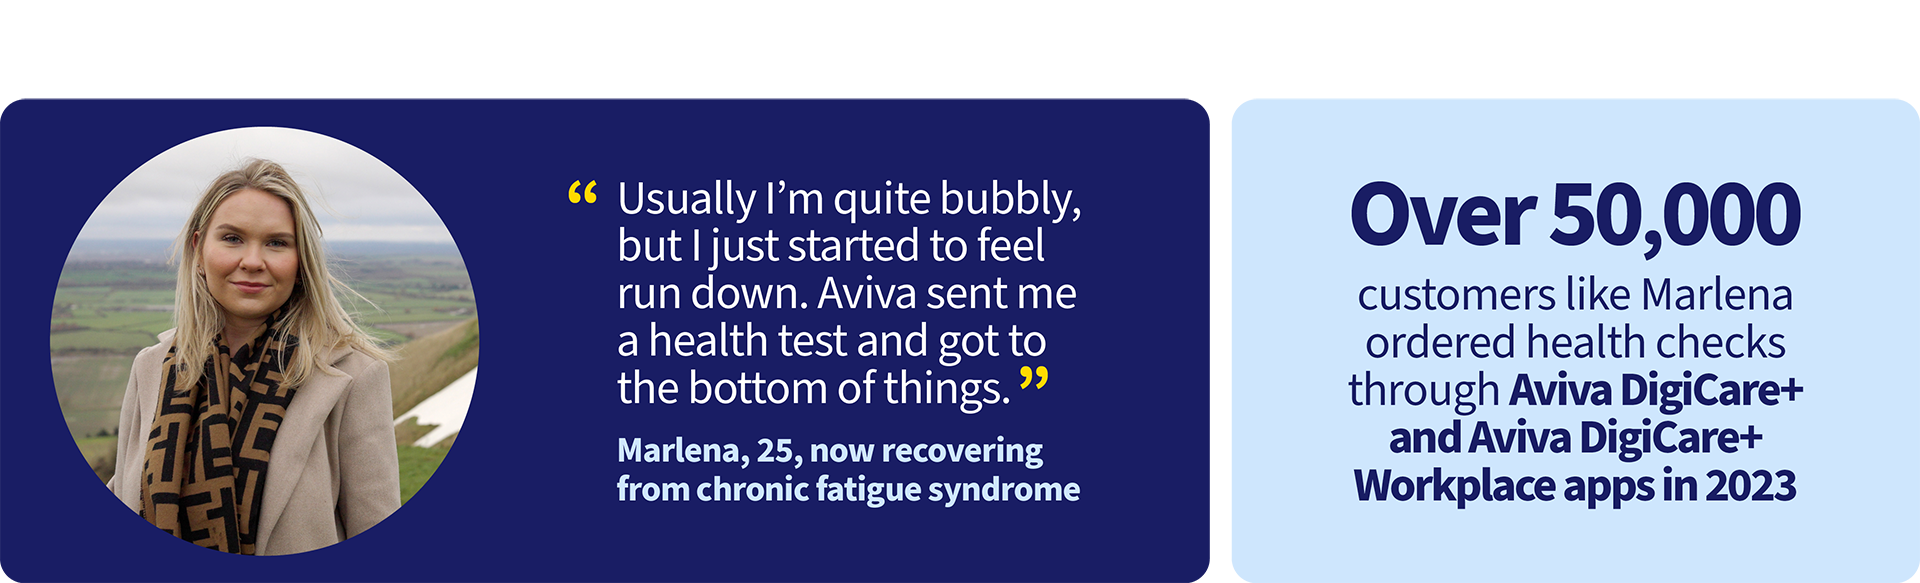 Marlena 25 now recovering from chronic fatigue syndrome, Usually quite bubbly but I just started to feel run down. Aviva sent me a health test and got to the bottom of things. Over 50,000 customers like Marlena ordered health checks through Aviva DigiCare+ and Aviva DigiCare+ Workplace apps in 2023